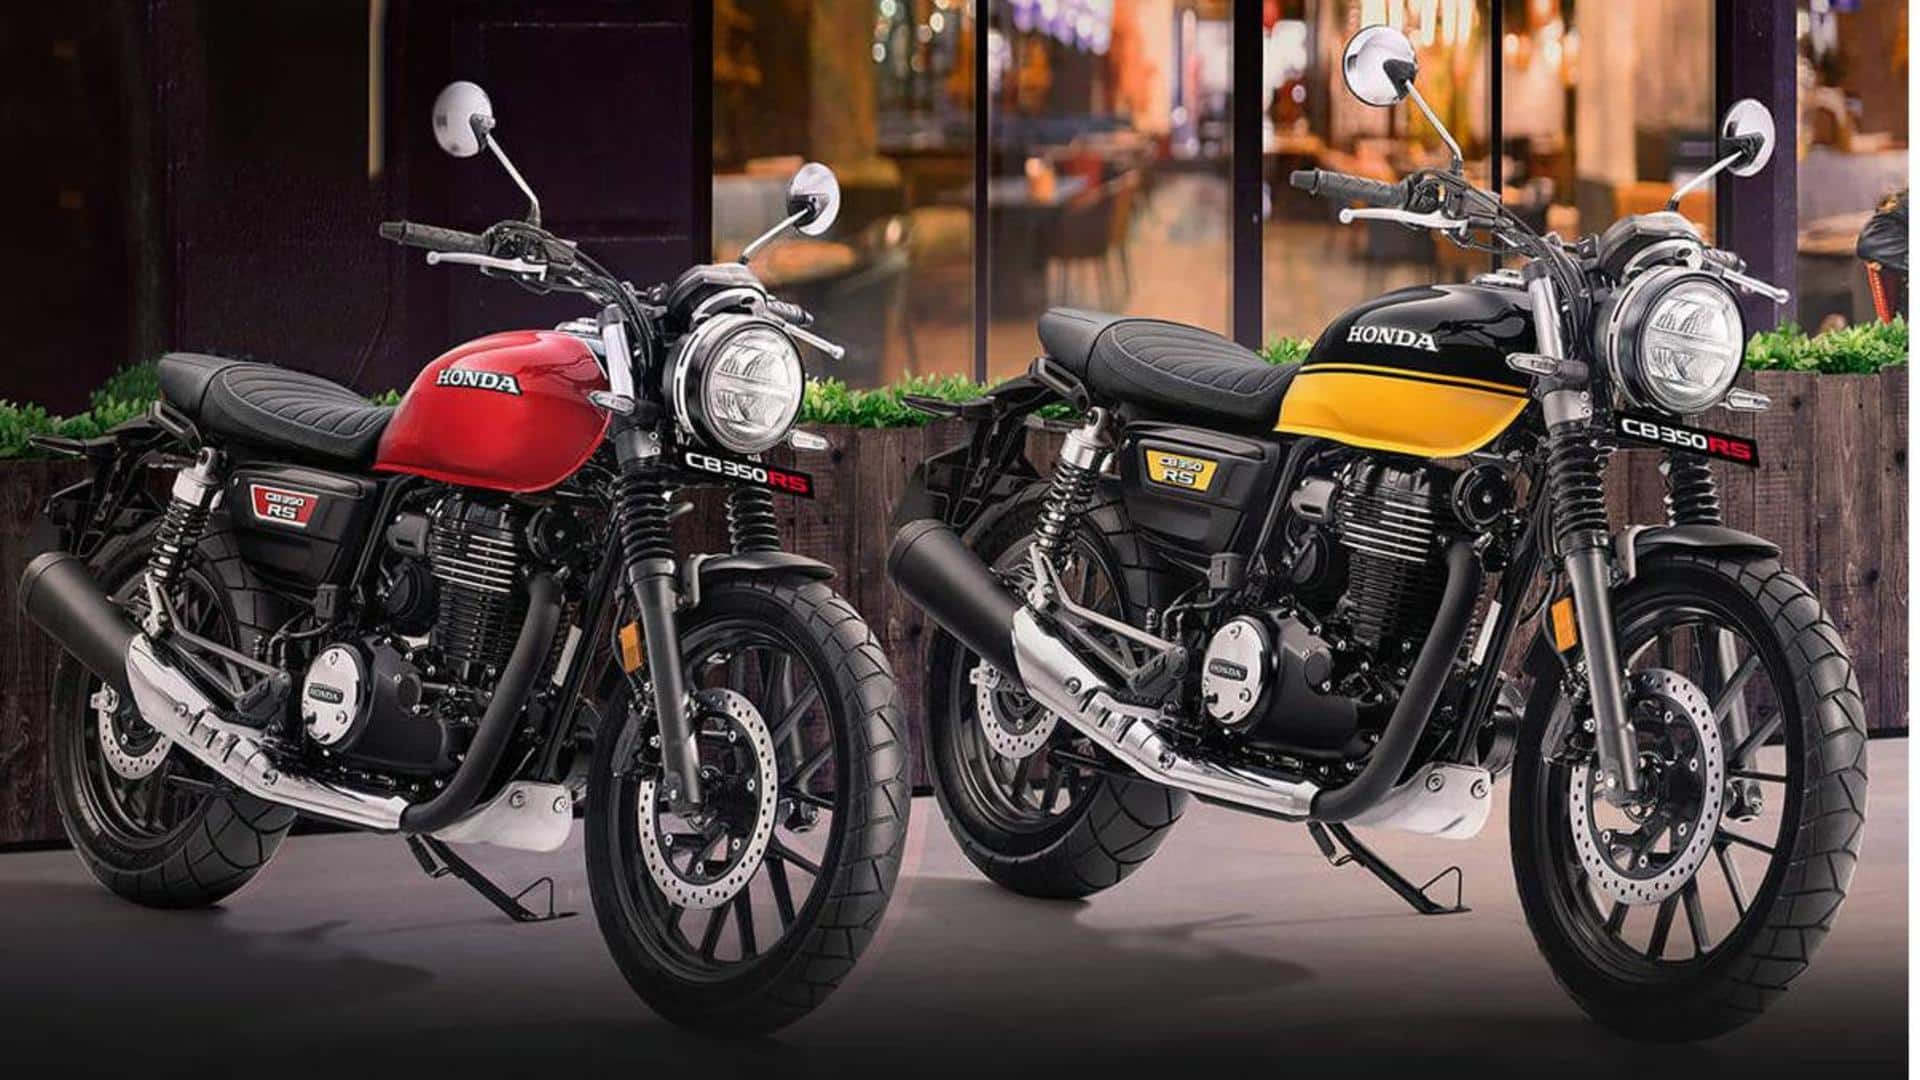 What to expect from the upcoming Honda CB350 cafe racer?